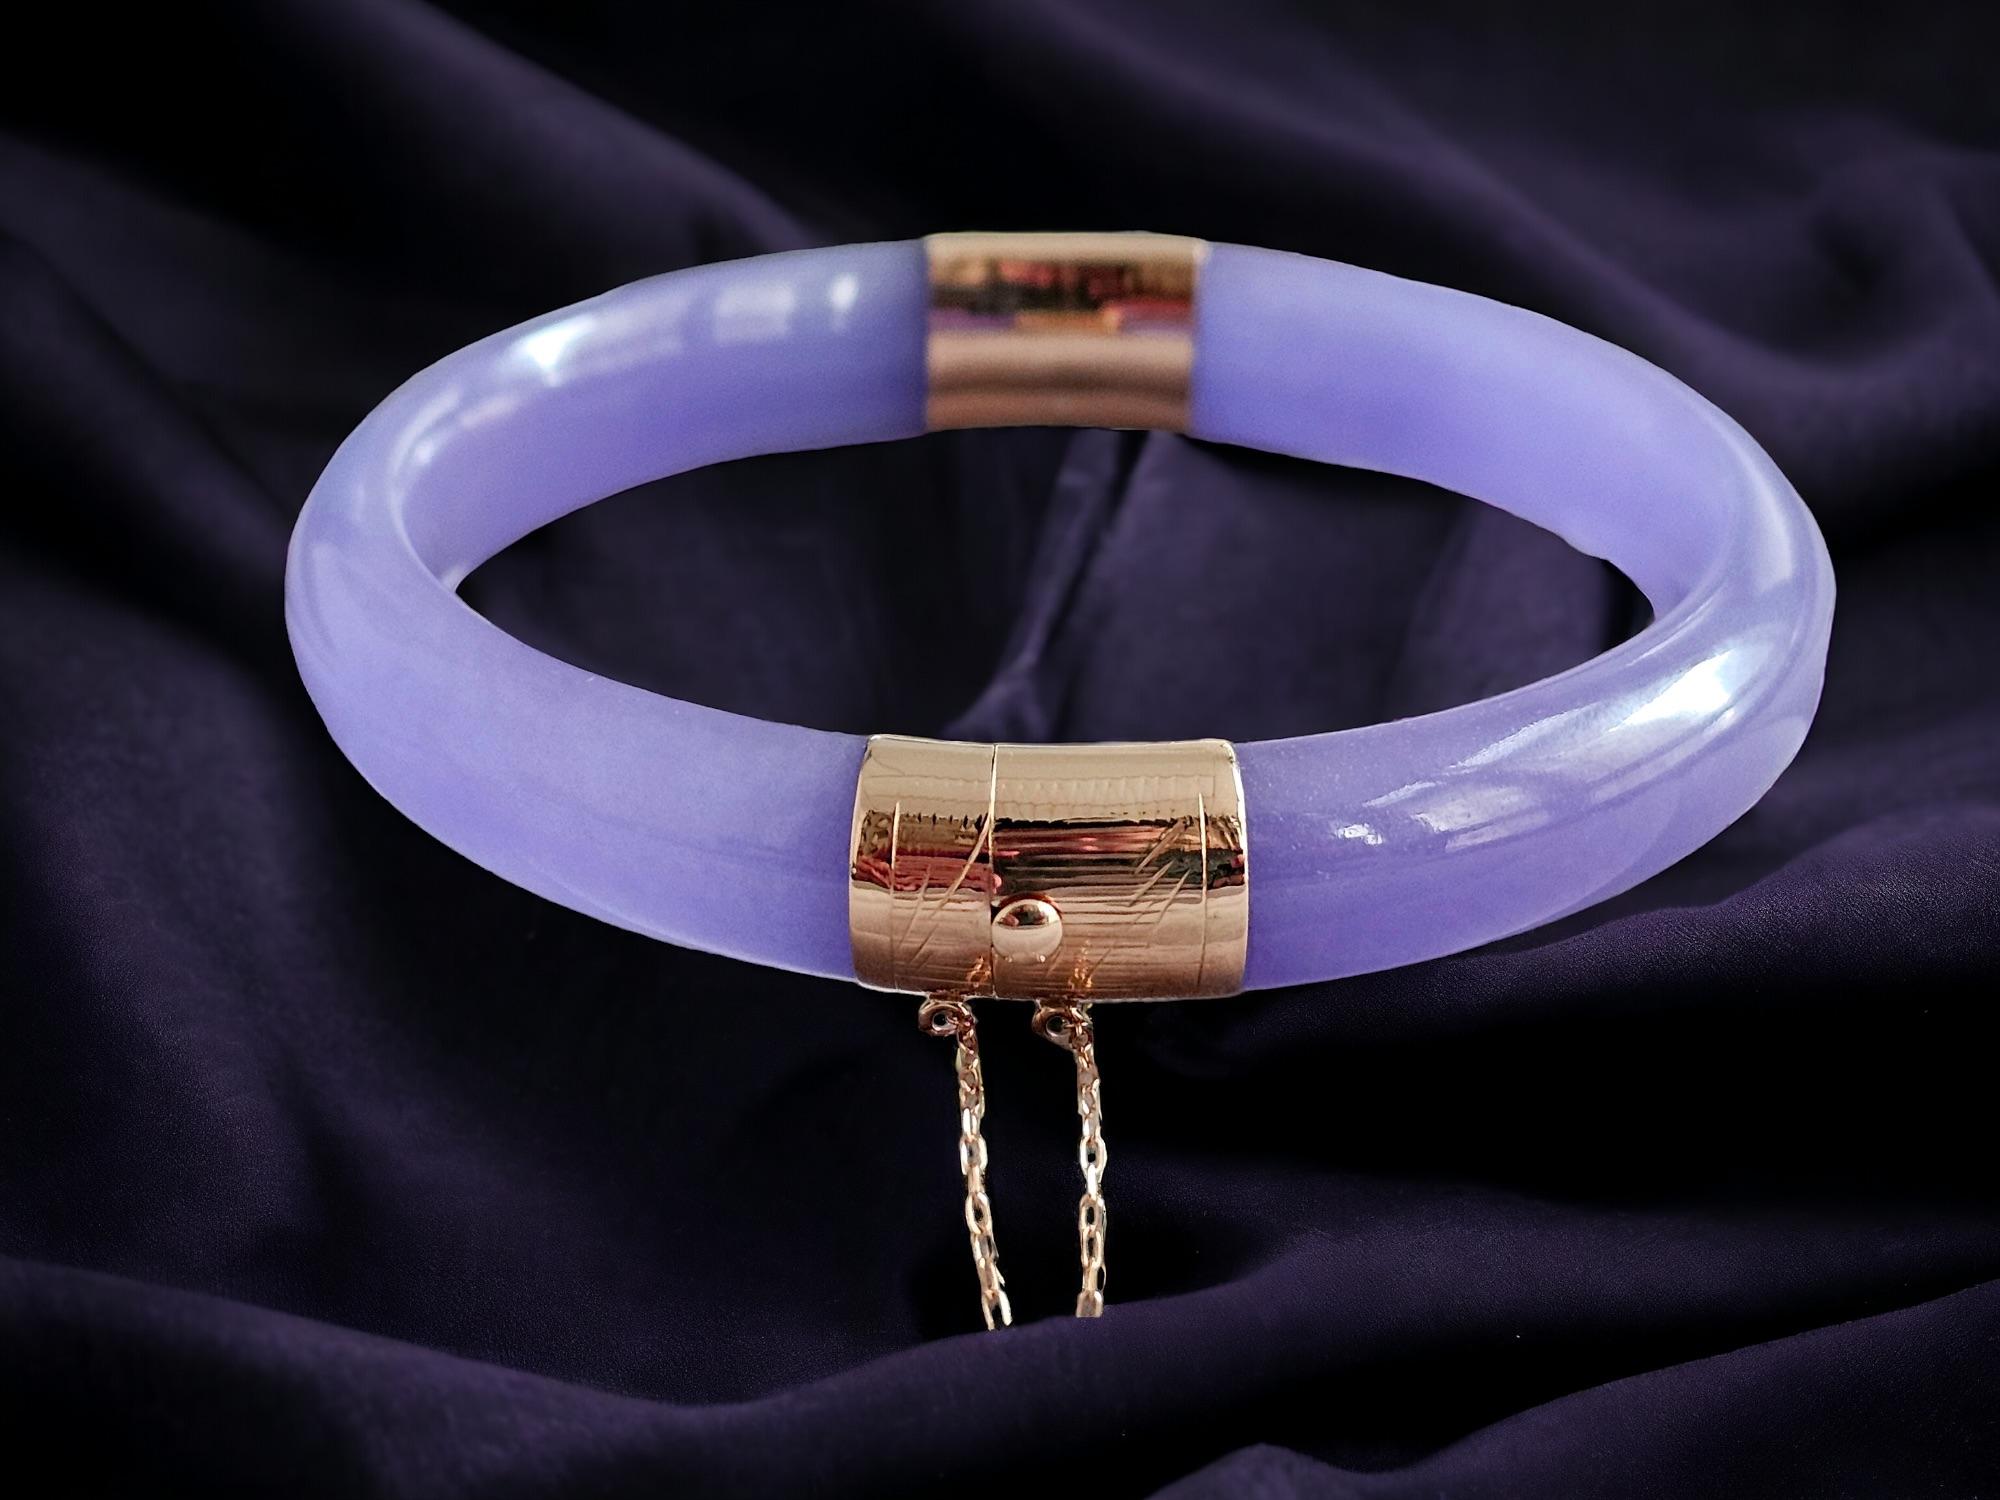 Viceroy's Circular Lavender Jade Bangle Bracelet (with 14K Yellow Gold) For Sale 1